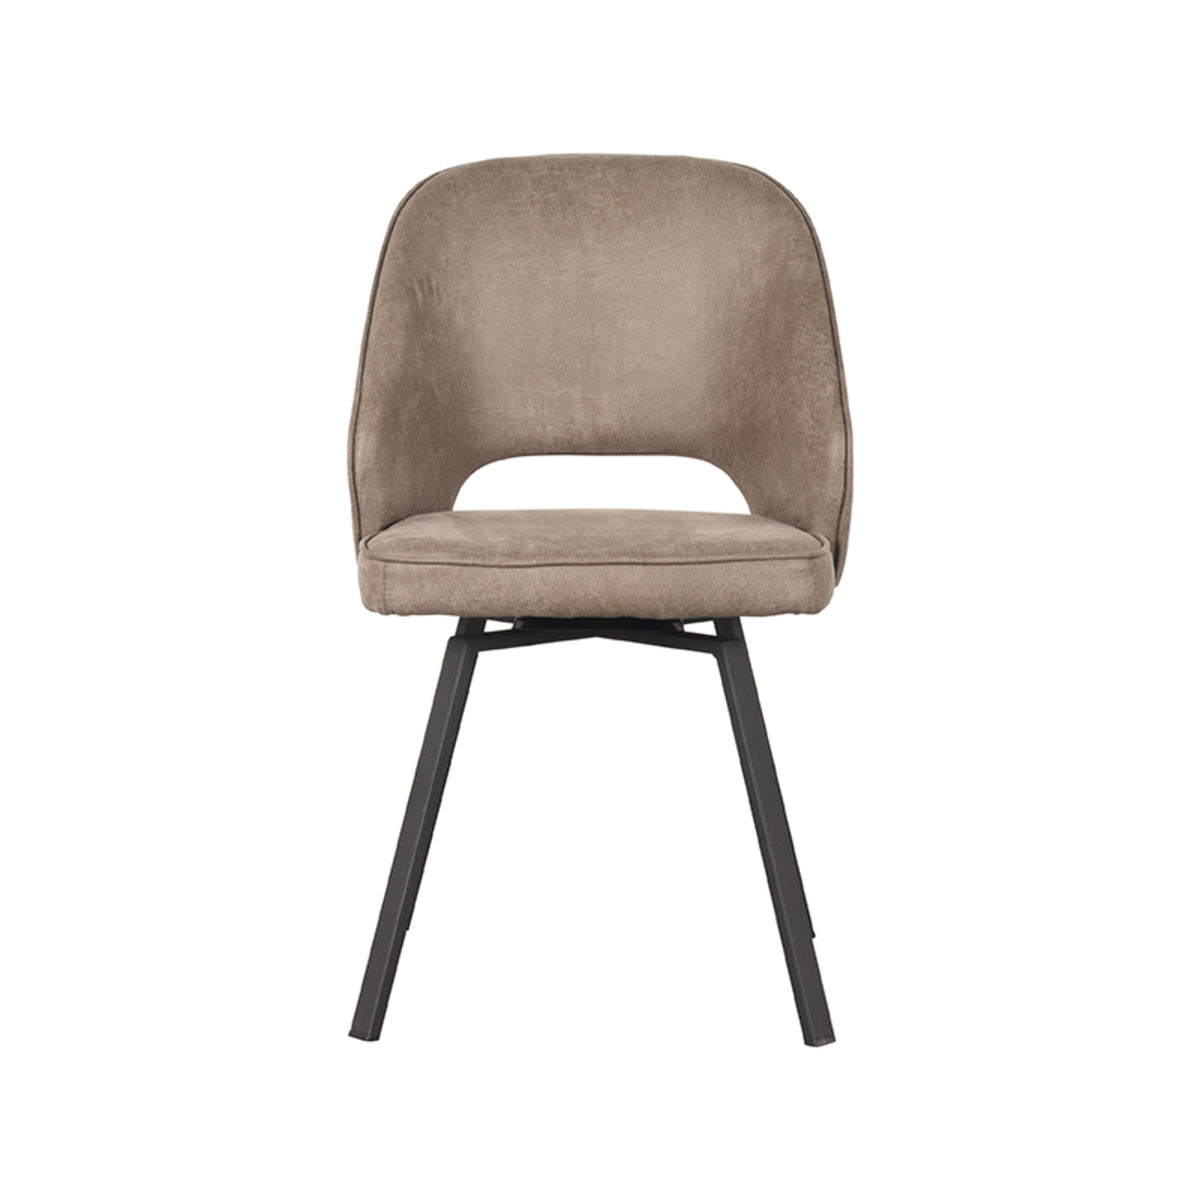 LABEL51 Lewis dining room chair - Taupe - Microfiber | 2 pieces